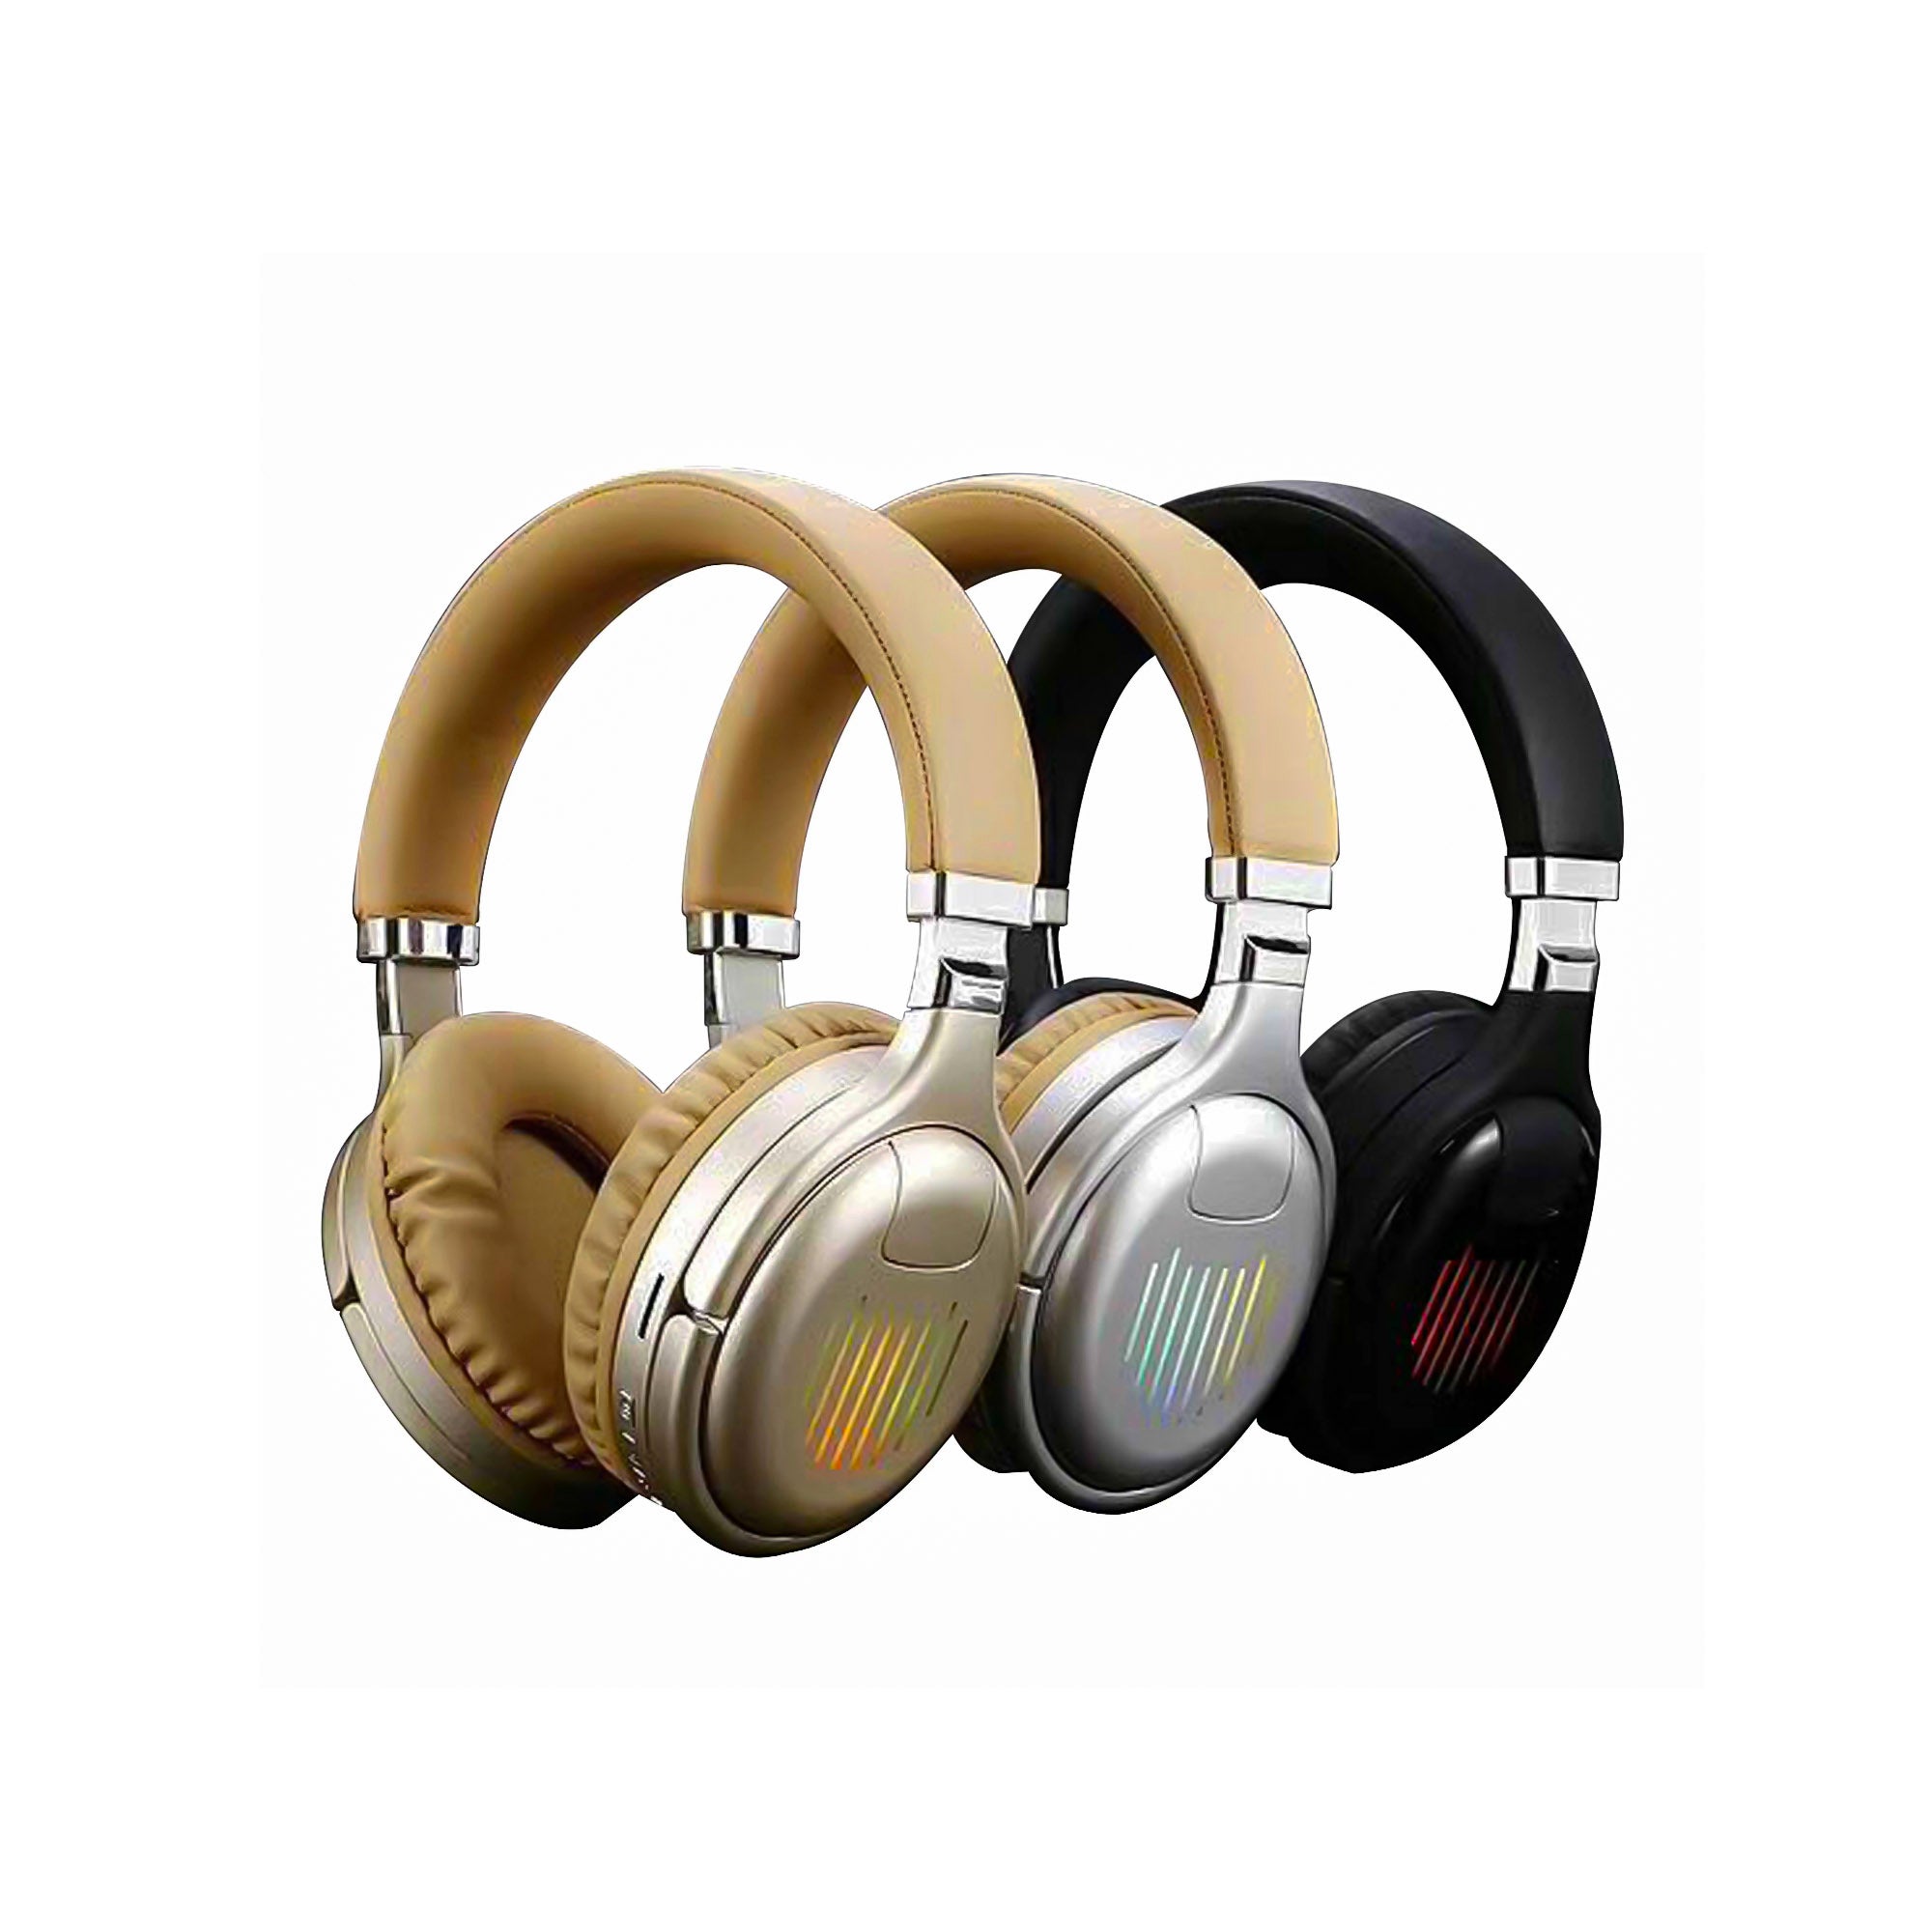 Ultra realistic boosted sound quality foldable bluetooth headphone